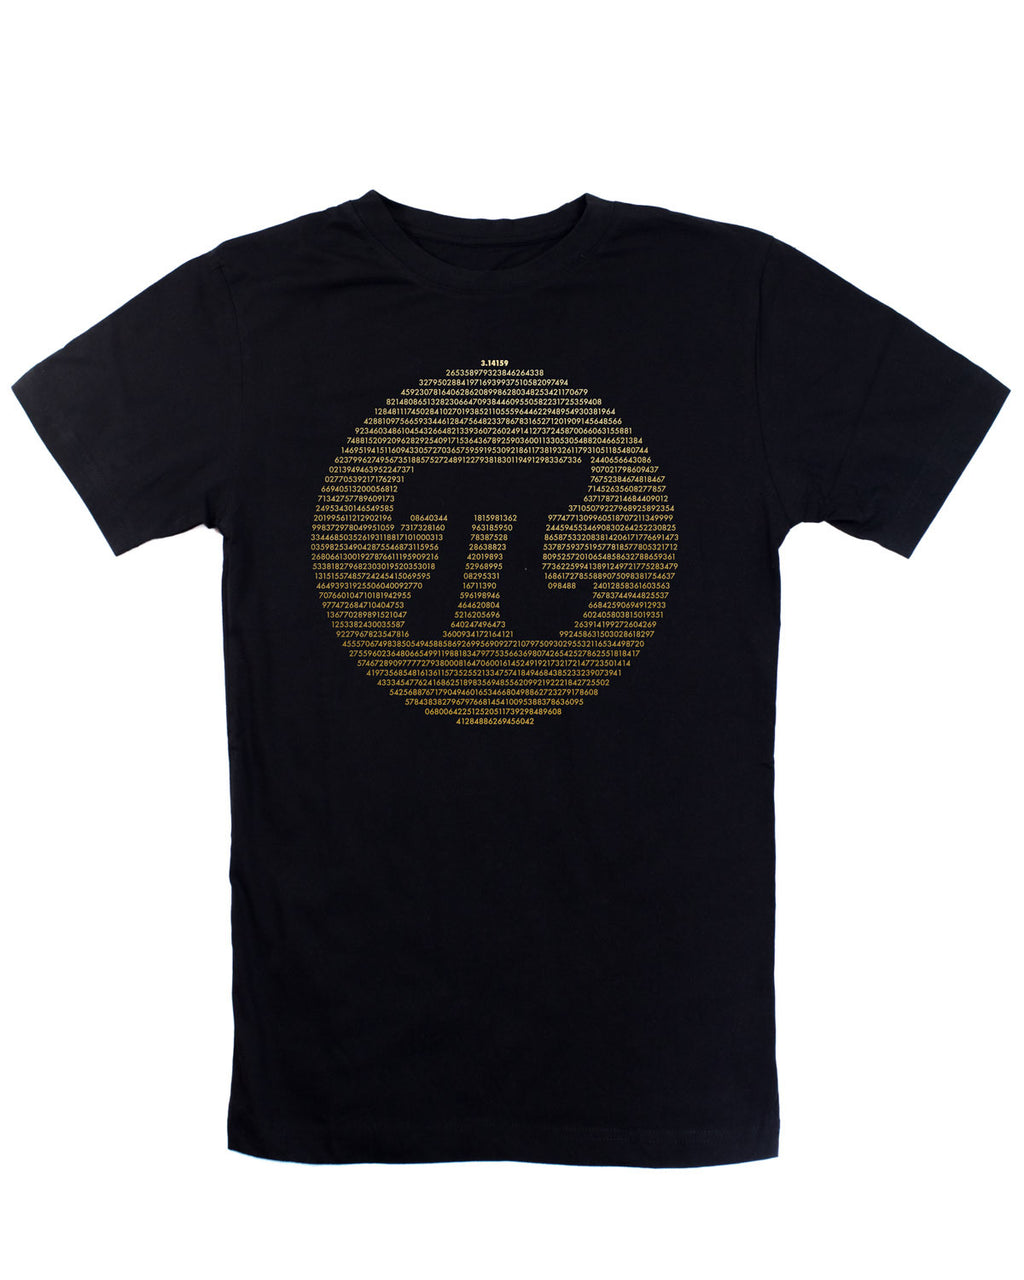 This is an image of a black t-shirt with 1,878 digits of Pi in gold surrounding a Pi symbol.